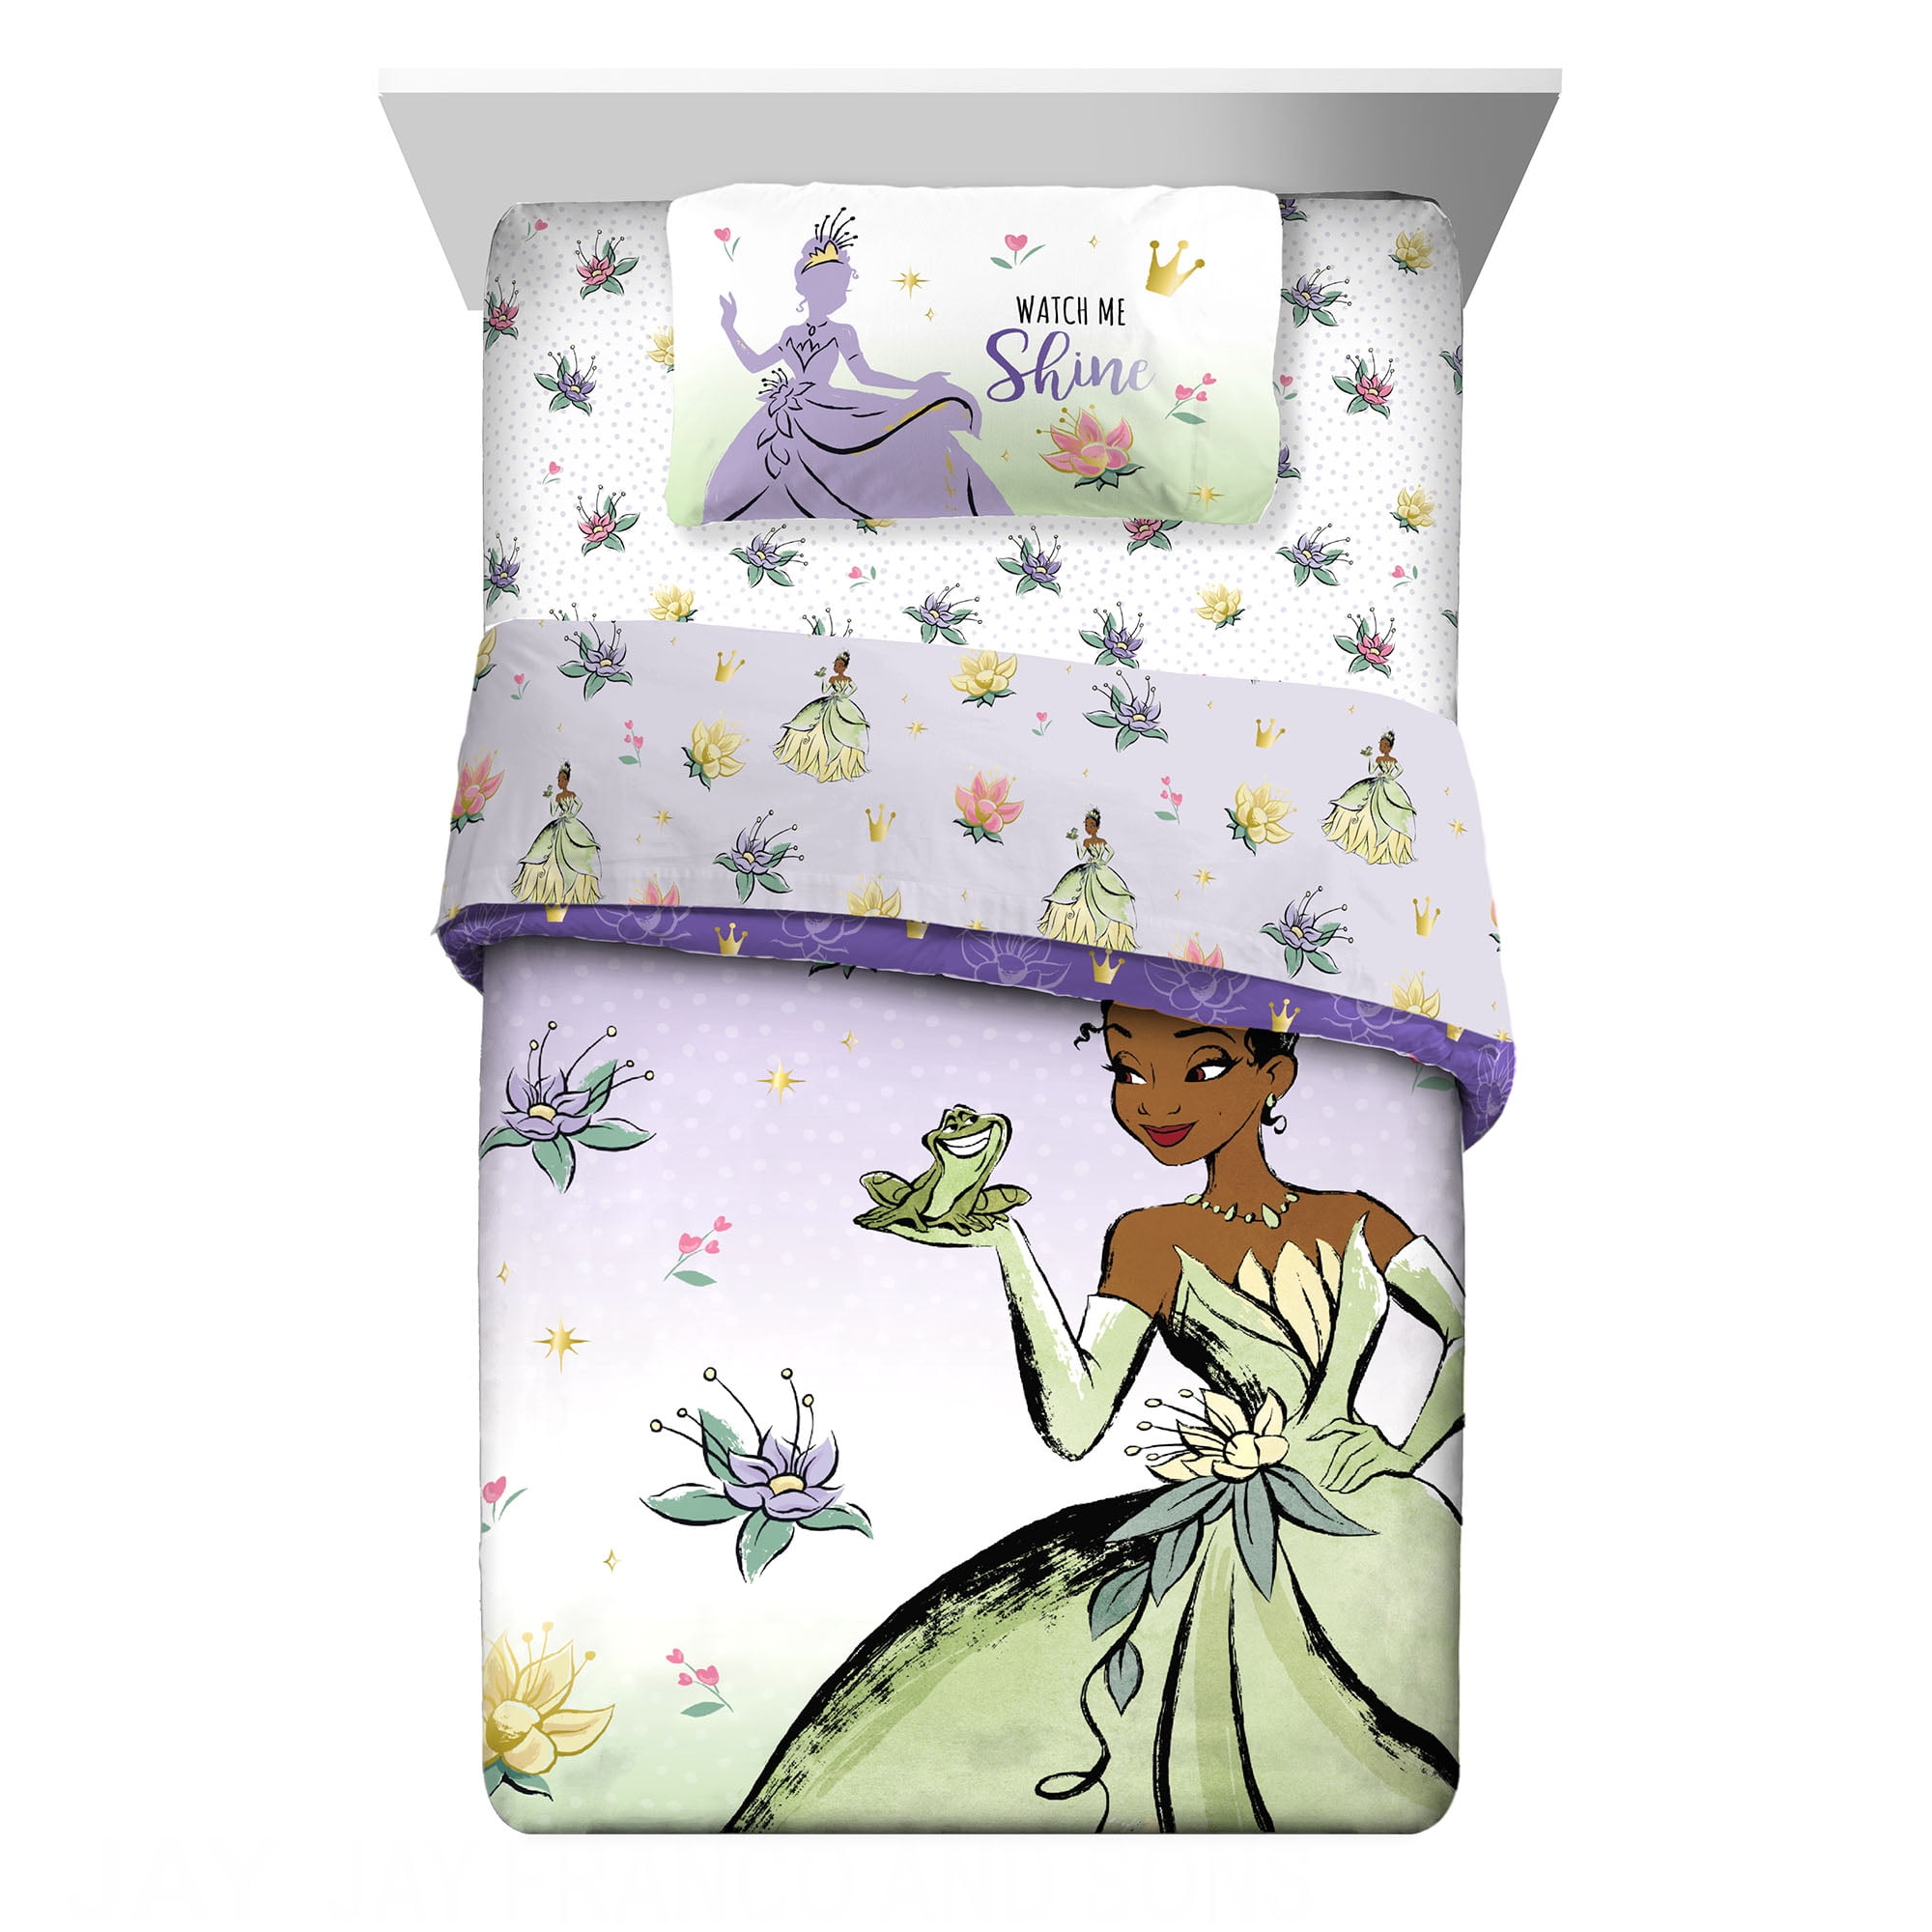 Princess Tiana Kids Twin Bed in a Bag, Comforter and Sheets, Purple, Disney